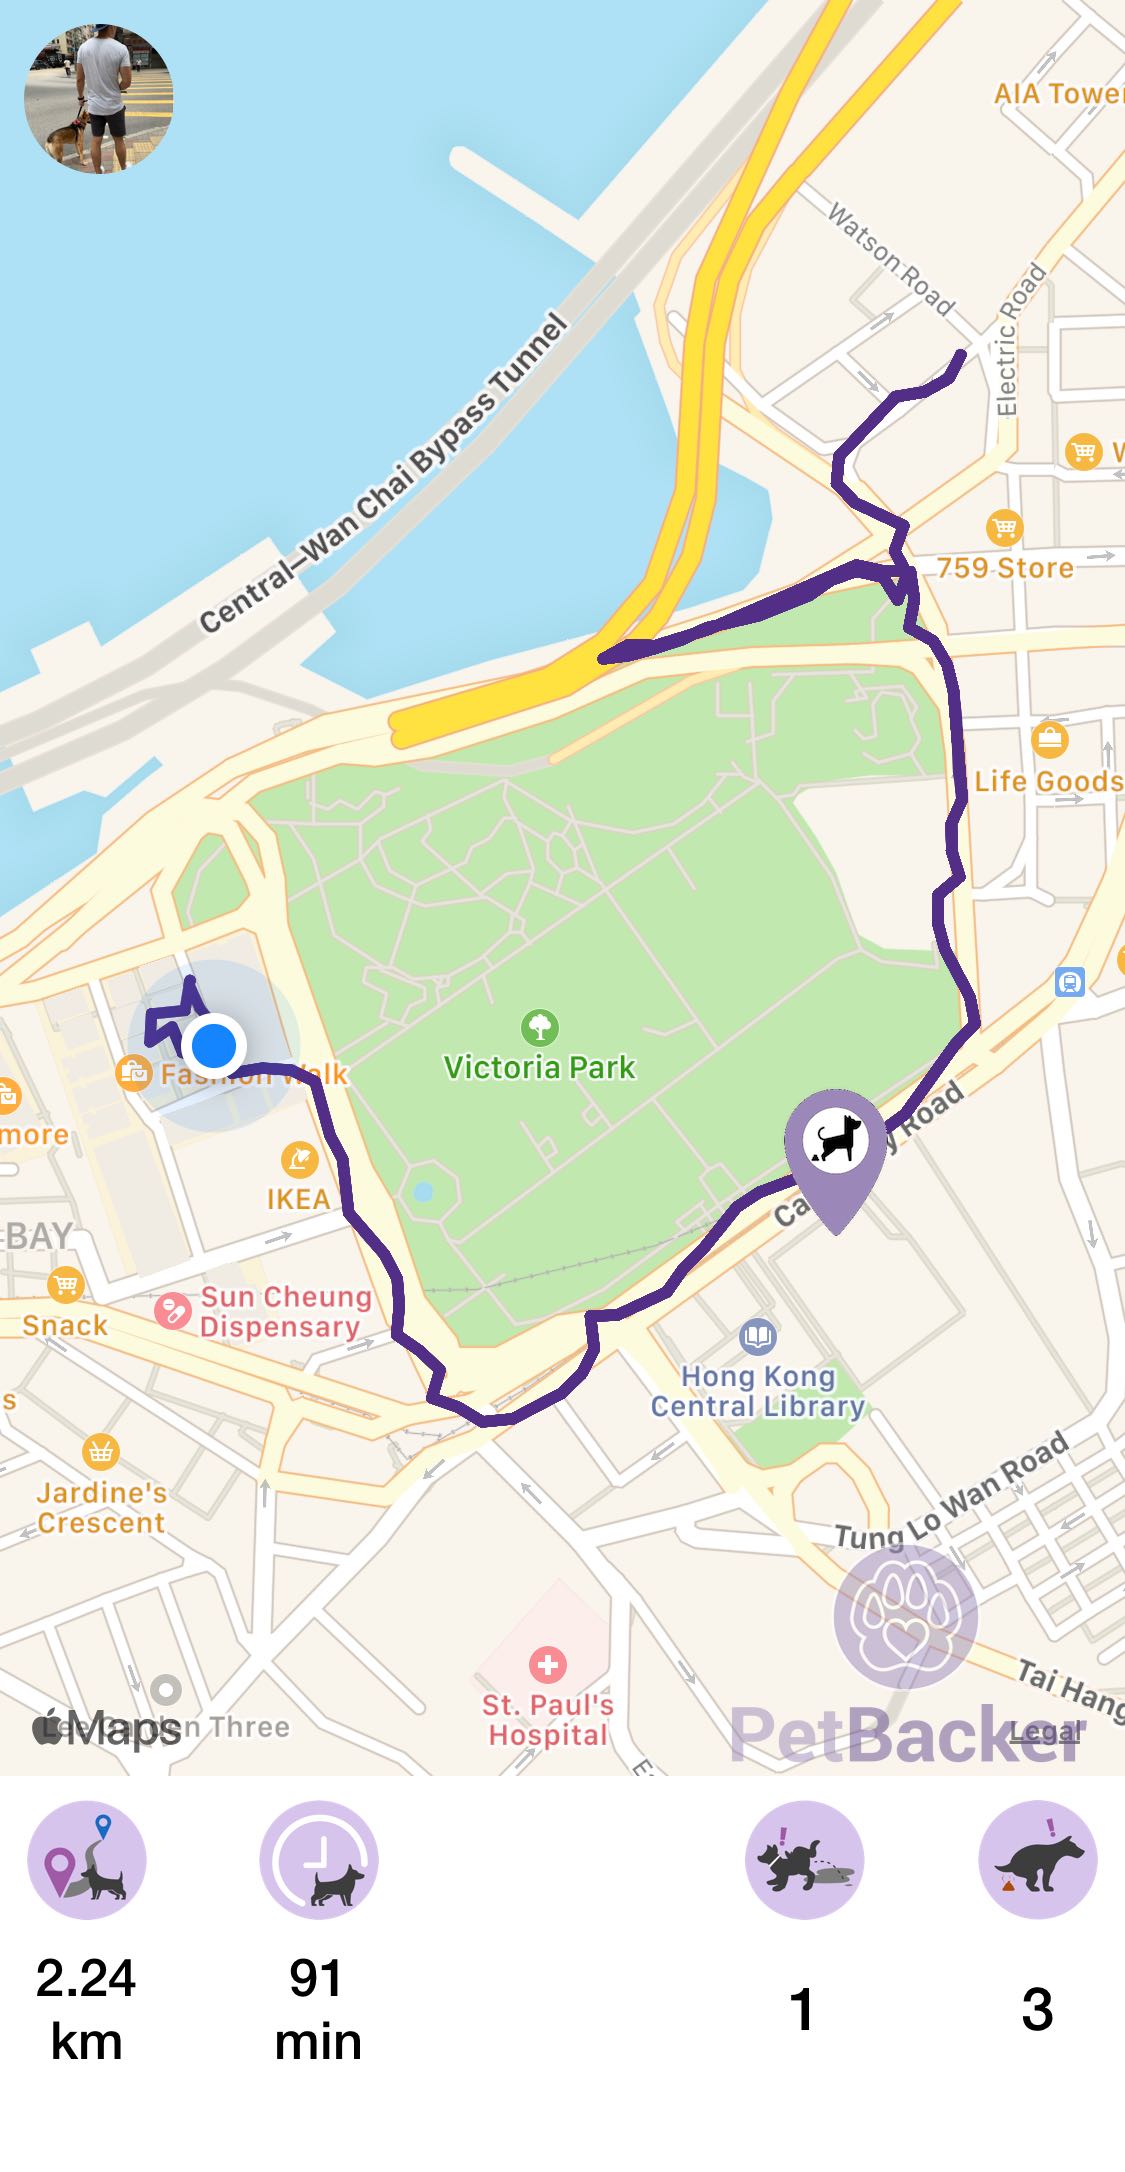 Just completed pet walking of 2.24 km